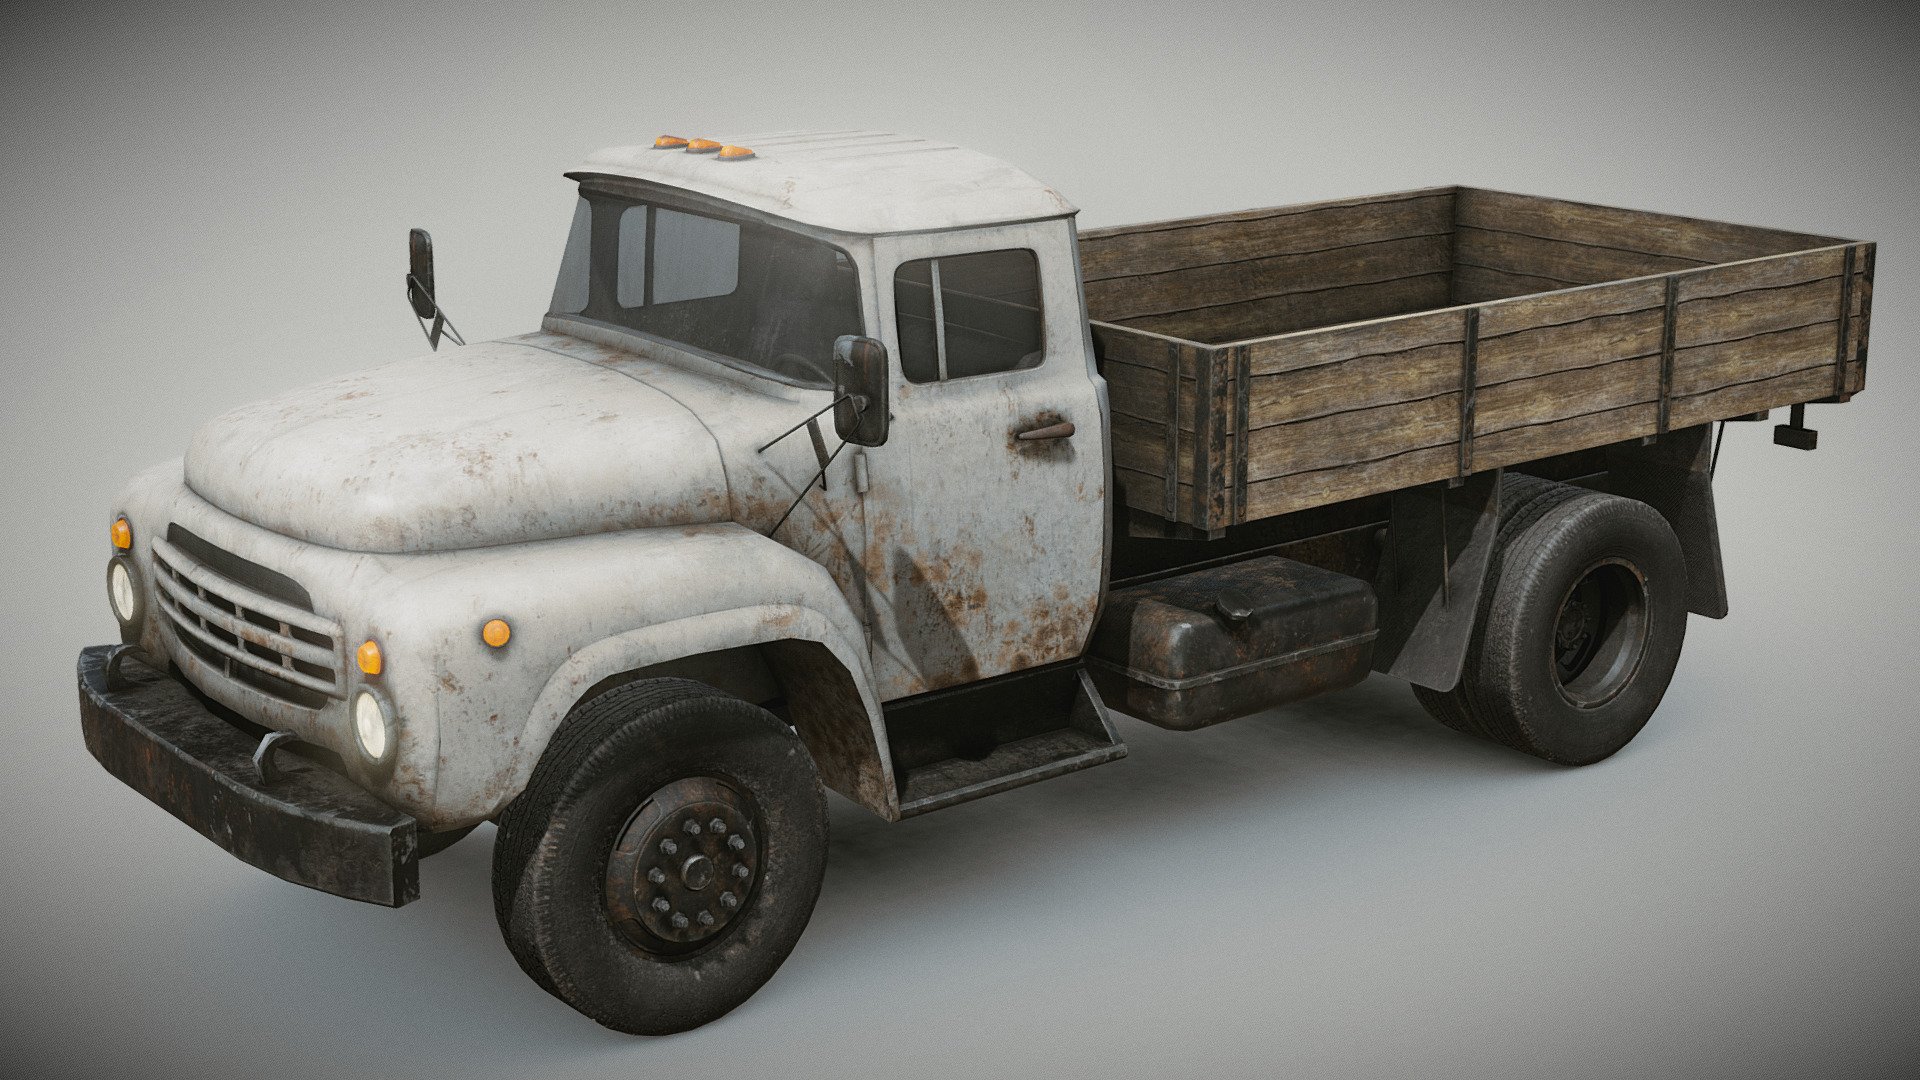 Soviet cargo truck inspired by the ZIL truck.

PBR textures in PNG format.

4k for the cabin adn cargo bed. 2k for the frame and wheels and 1k with alpha transparency for the glass.

Cabin, wheels, glass, frame and cargo bed are separate objects 3d model